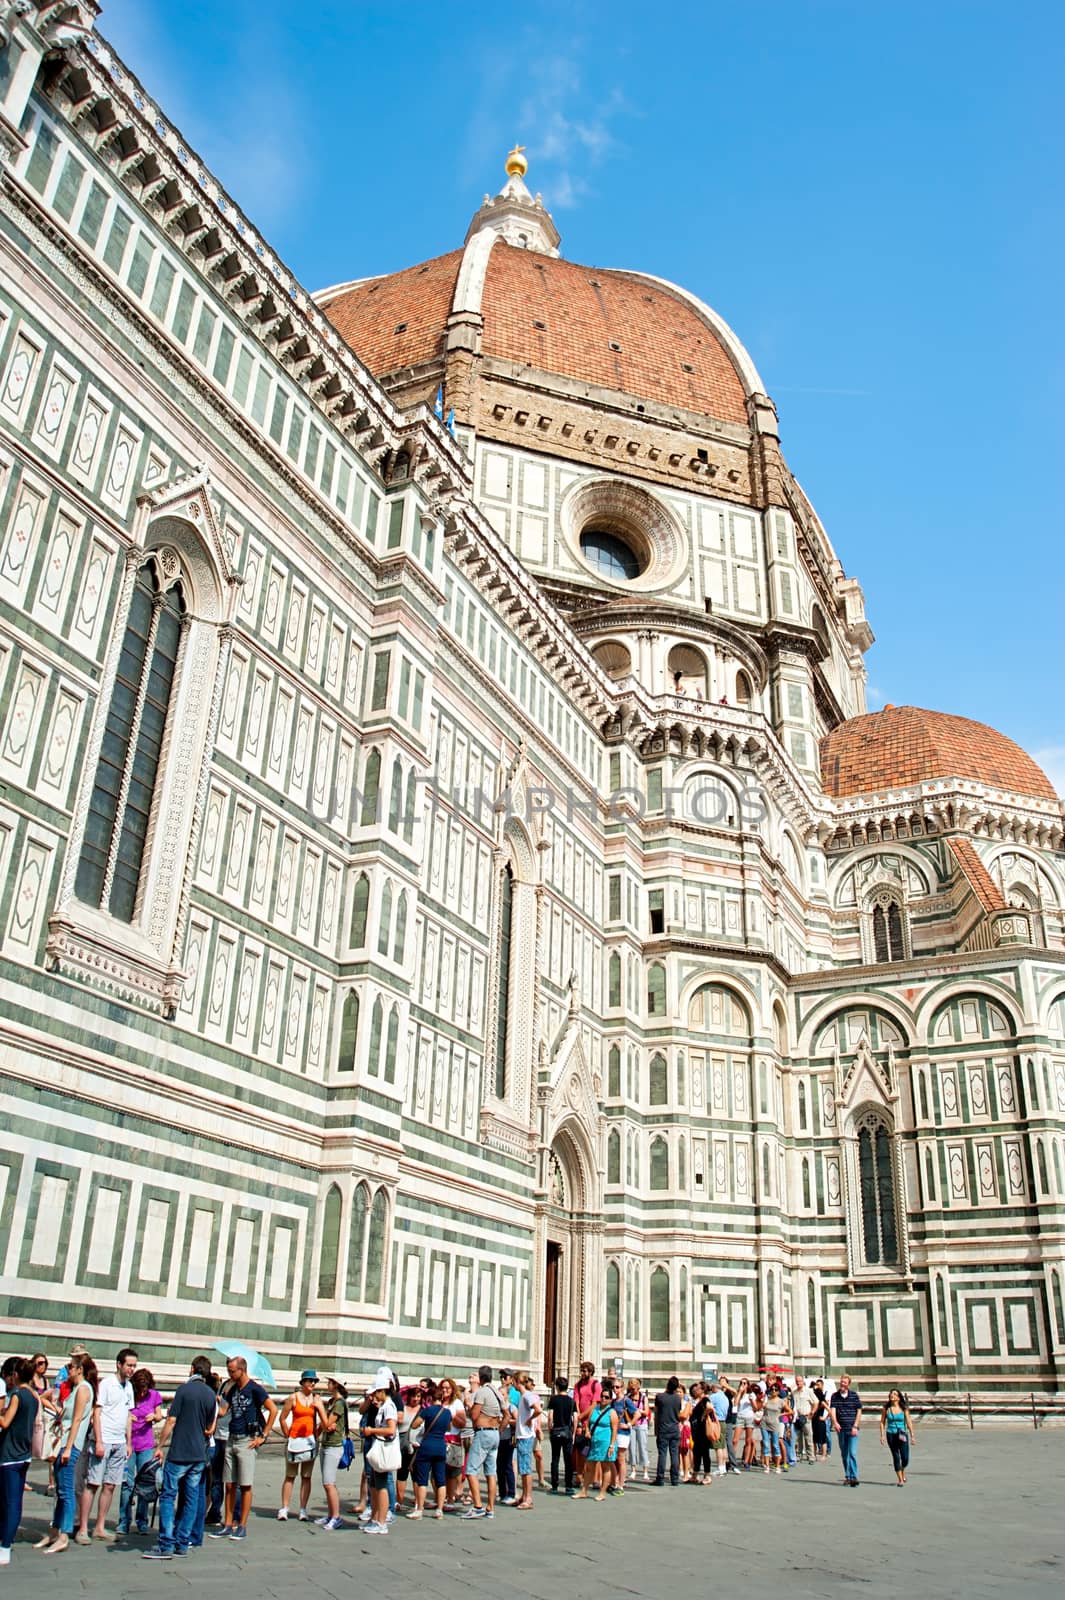 Cathedral Santa Maria del Fiore in Florence by joyfull